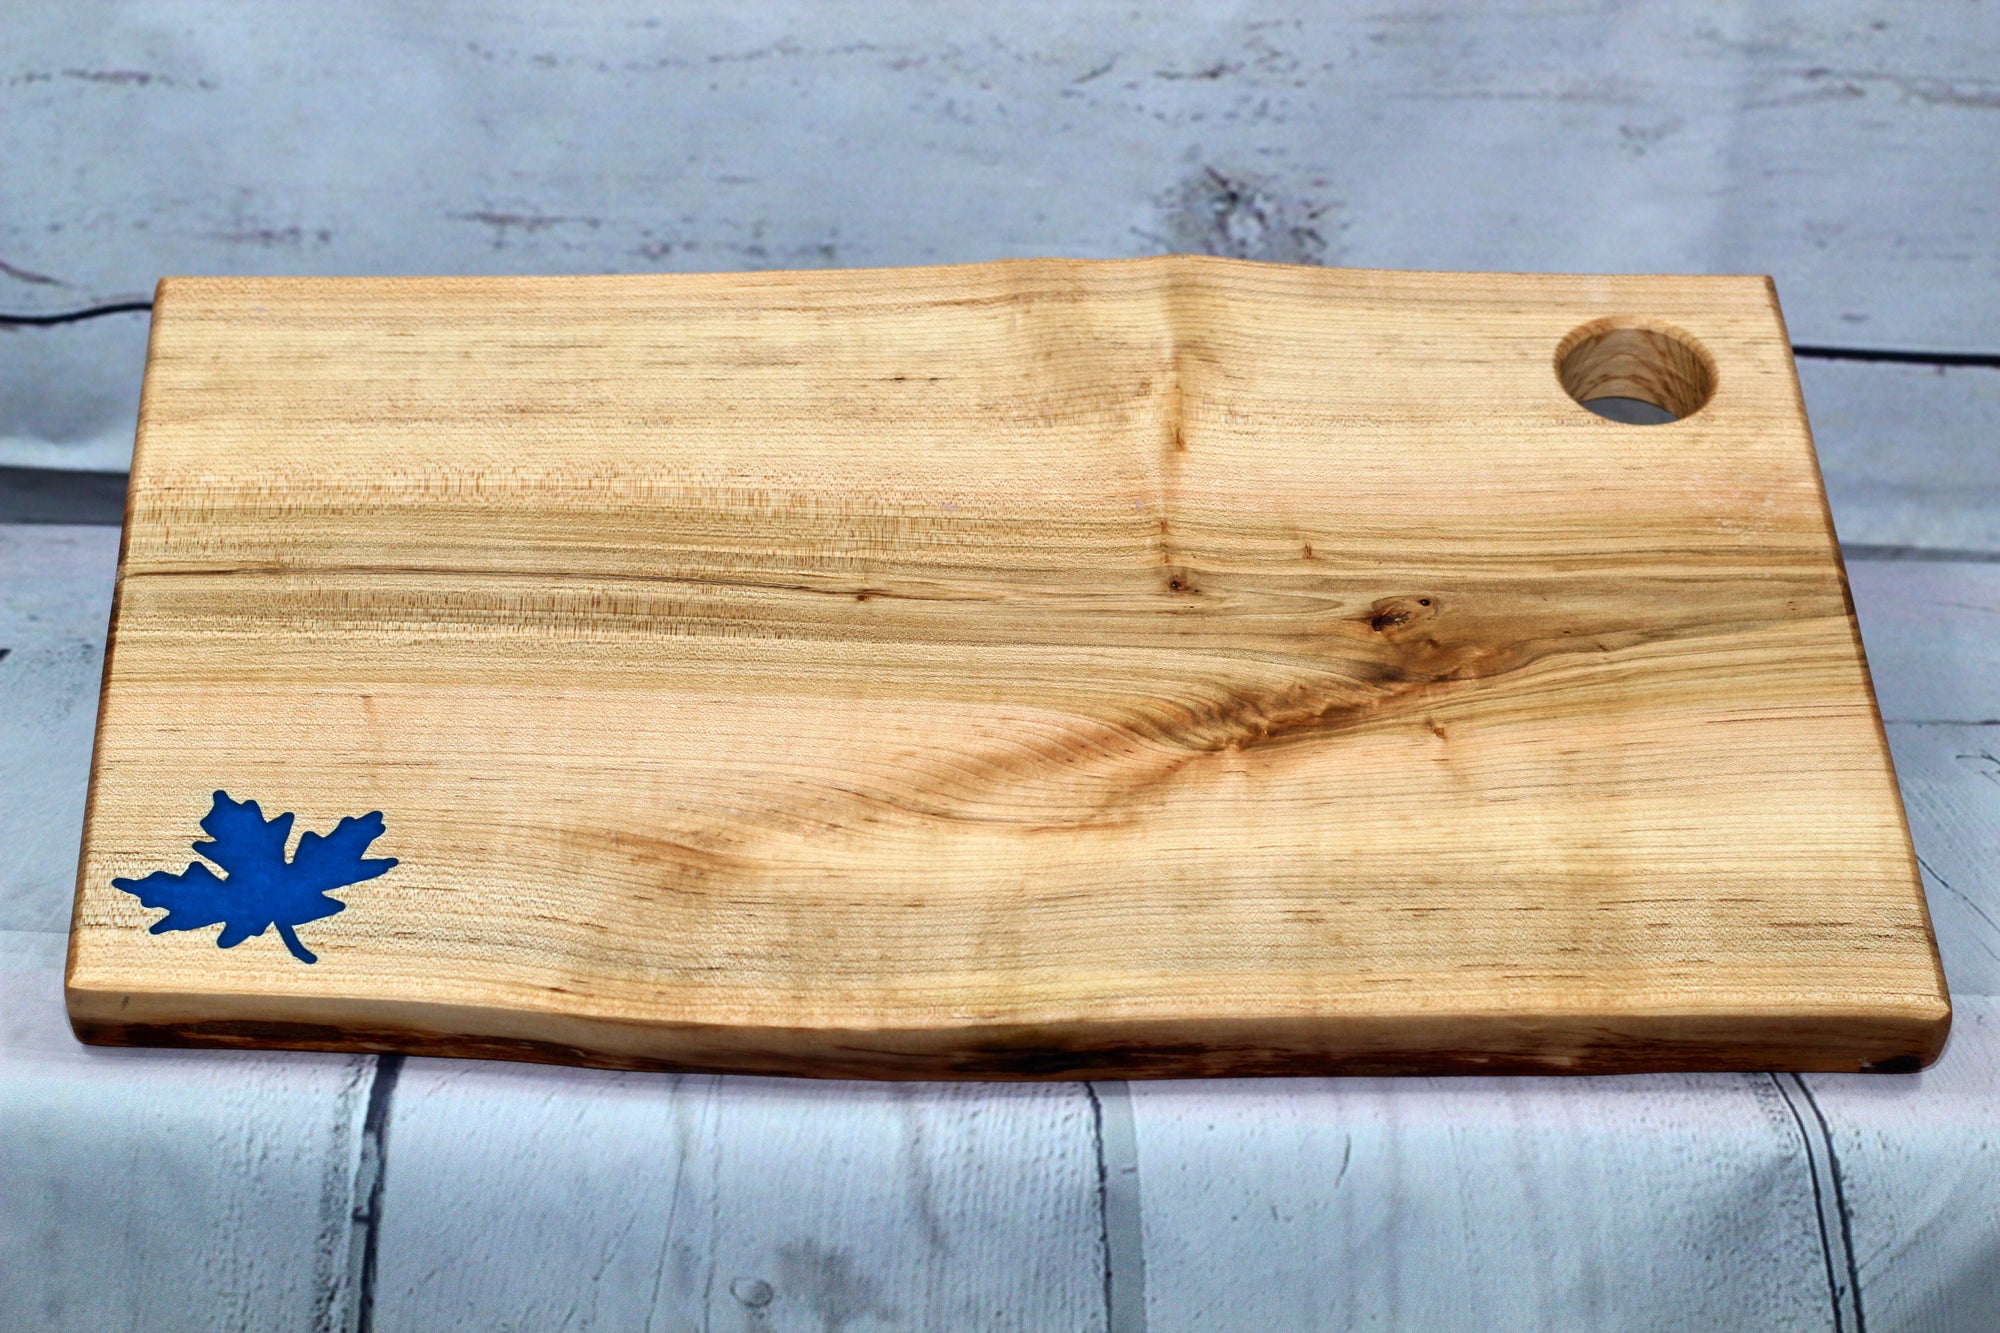 Charcuterie board (live edge maple with blue epoxy leaf)